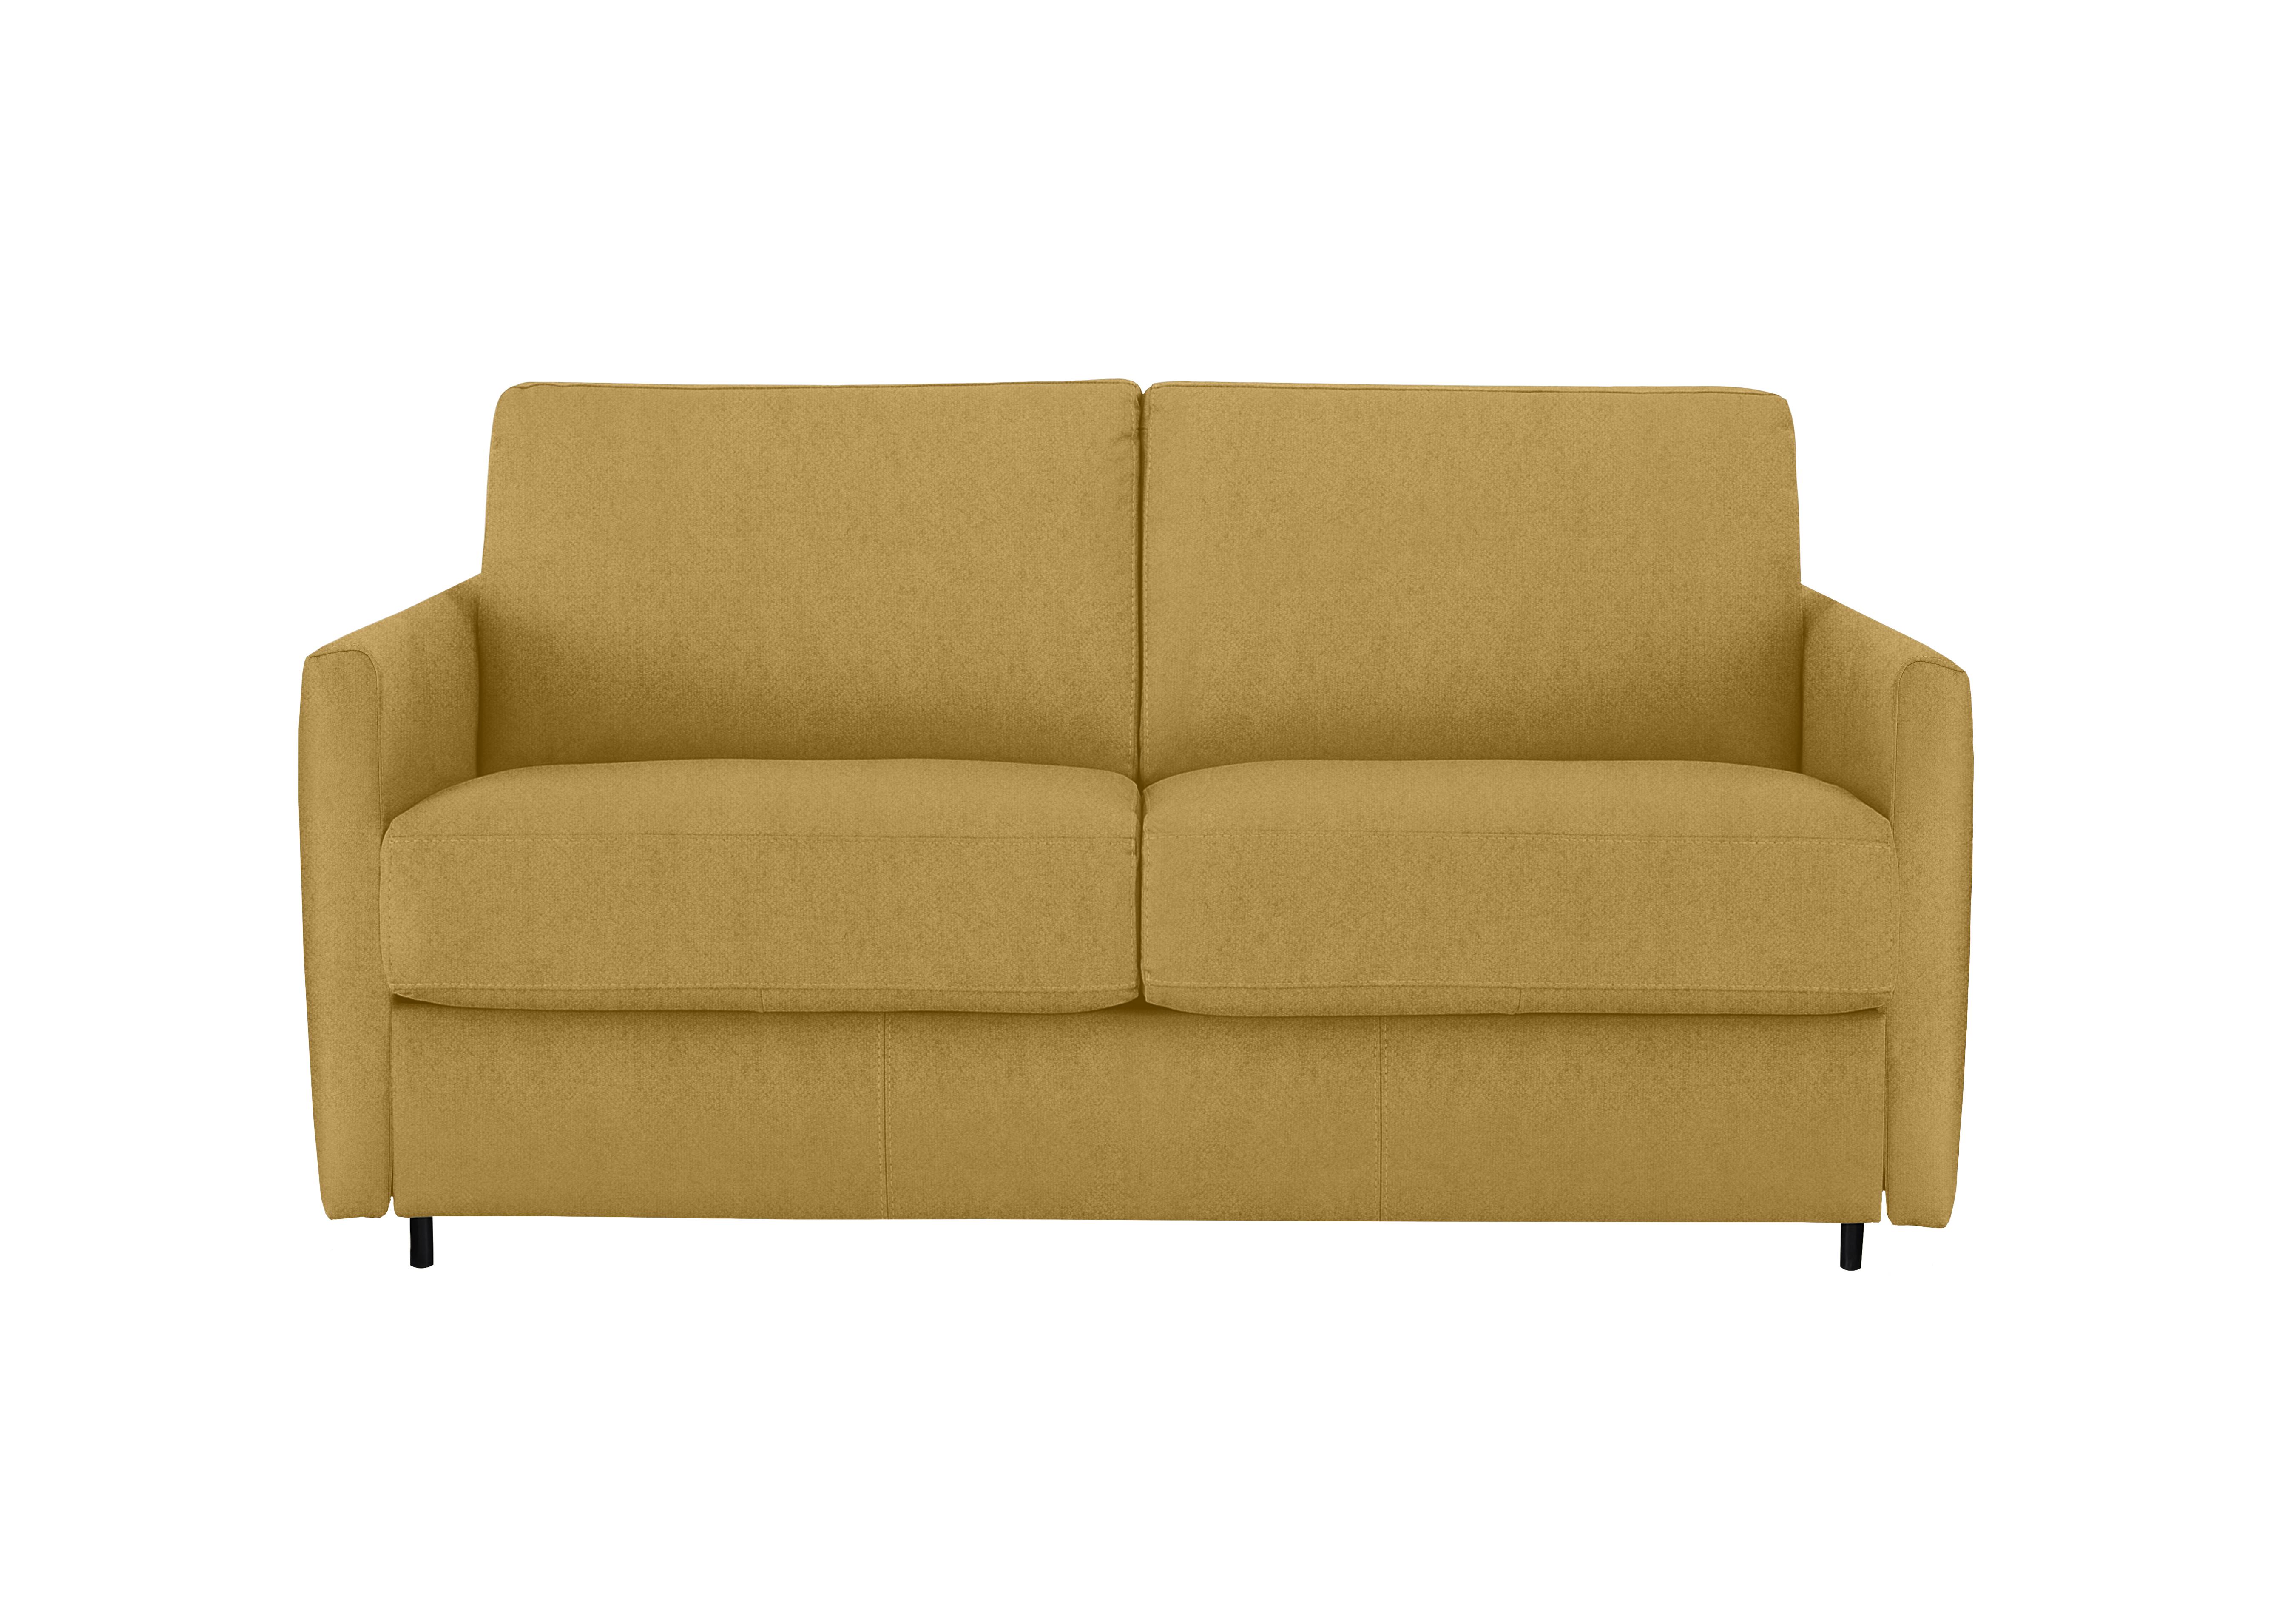 Alcova 2 Seater Fabric Sofa Bed with Slim Arms in Fuente Mostaza on Furniture Village